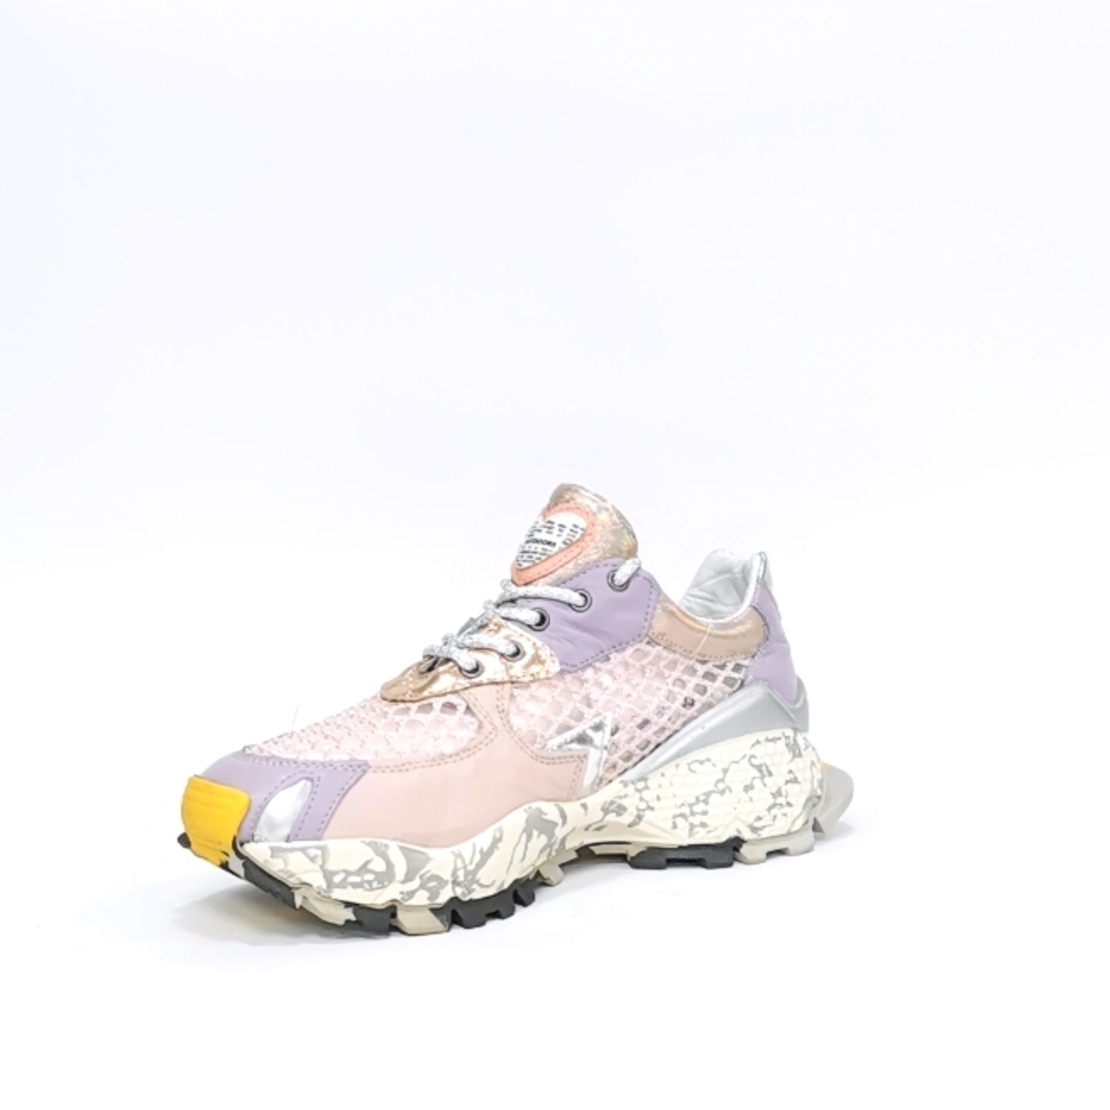 Women's sneakers made of natural leather with anatomical insole in pink + purple color/73054